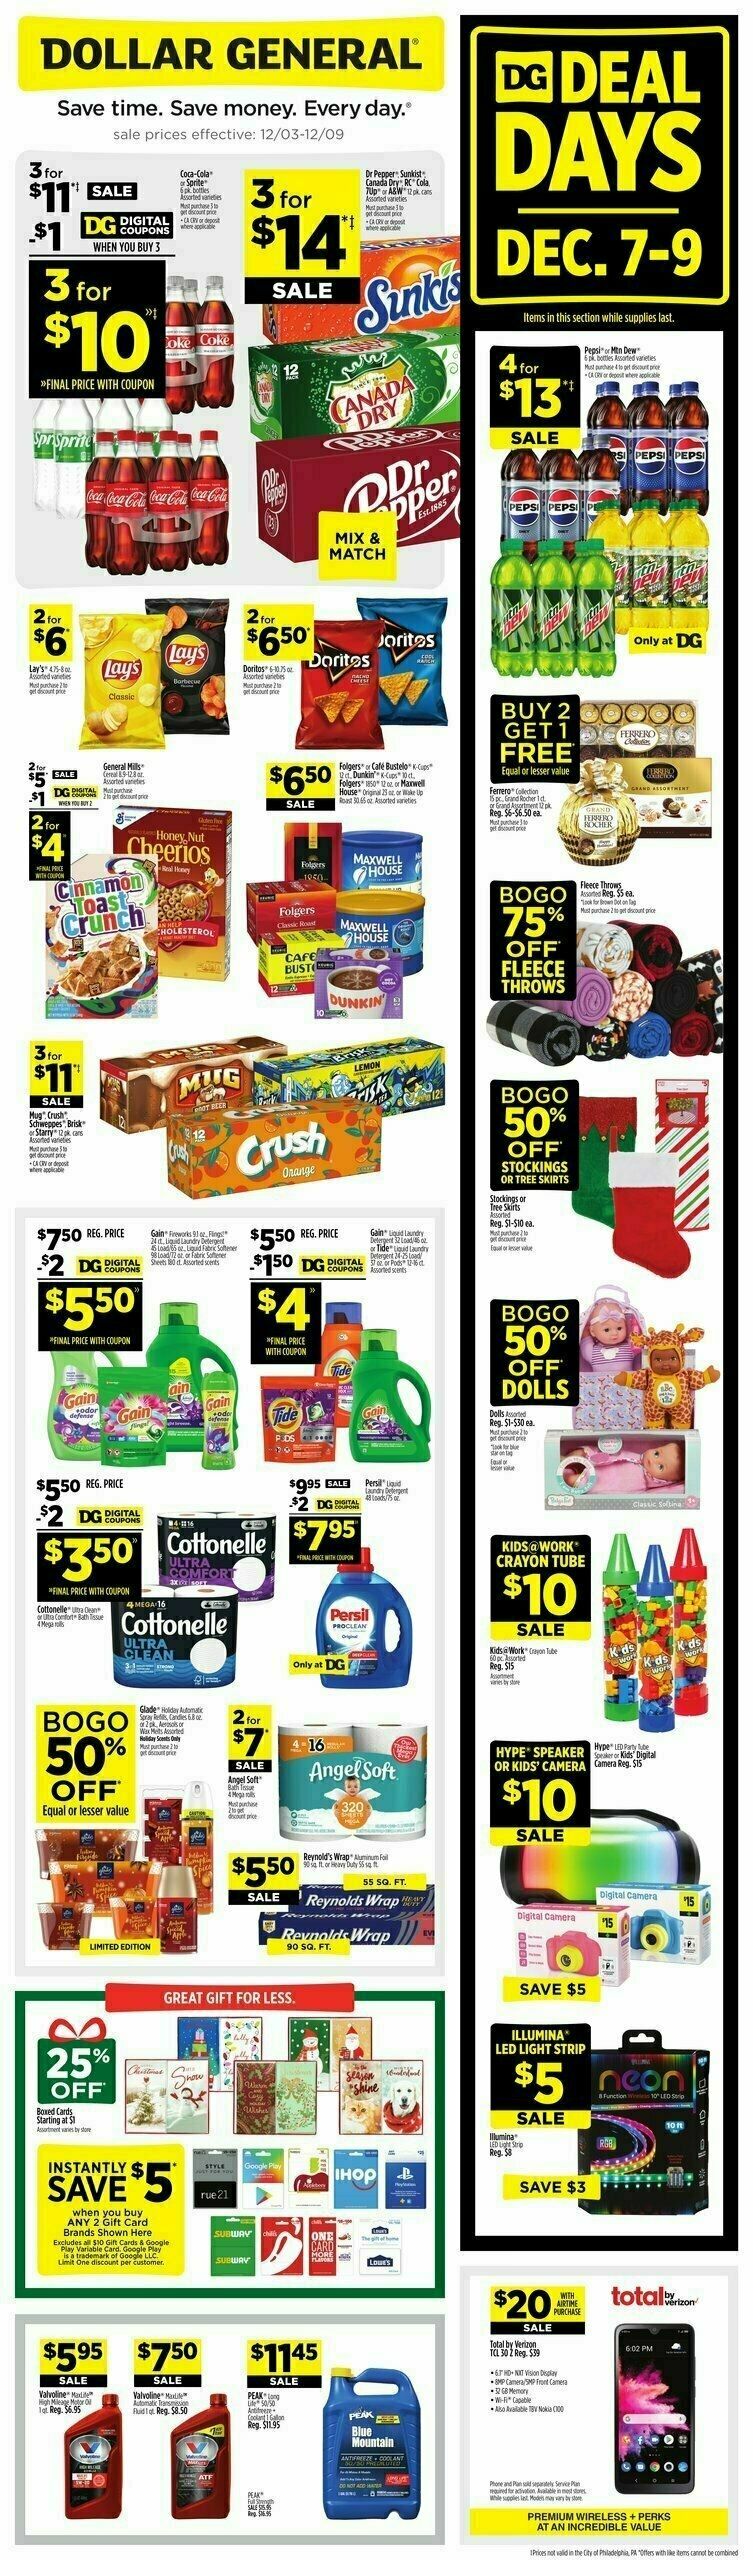 Dollar General Weekly Ad from December 3